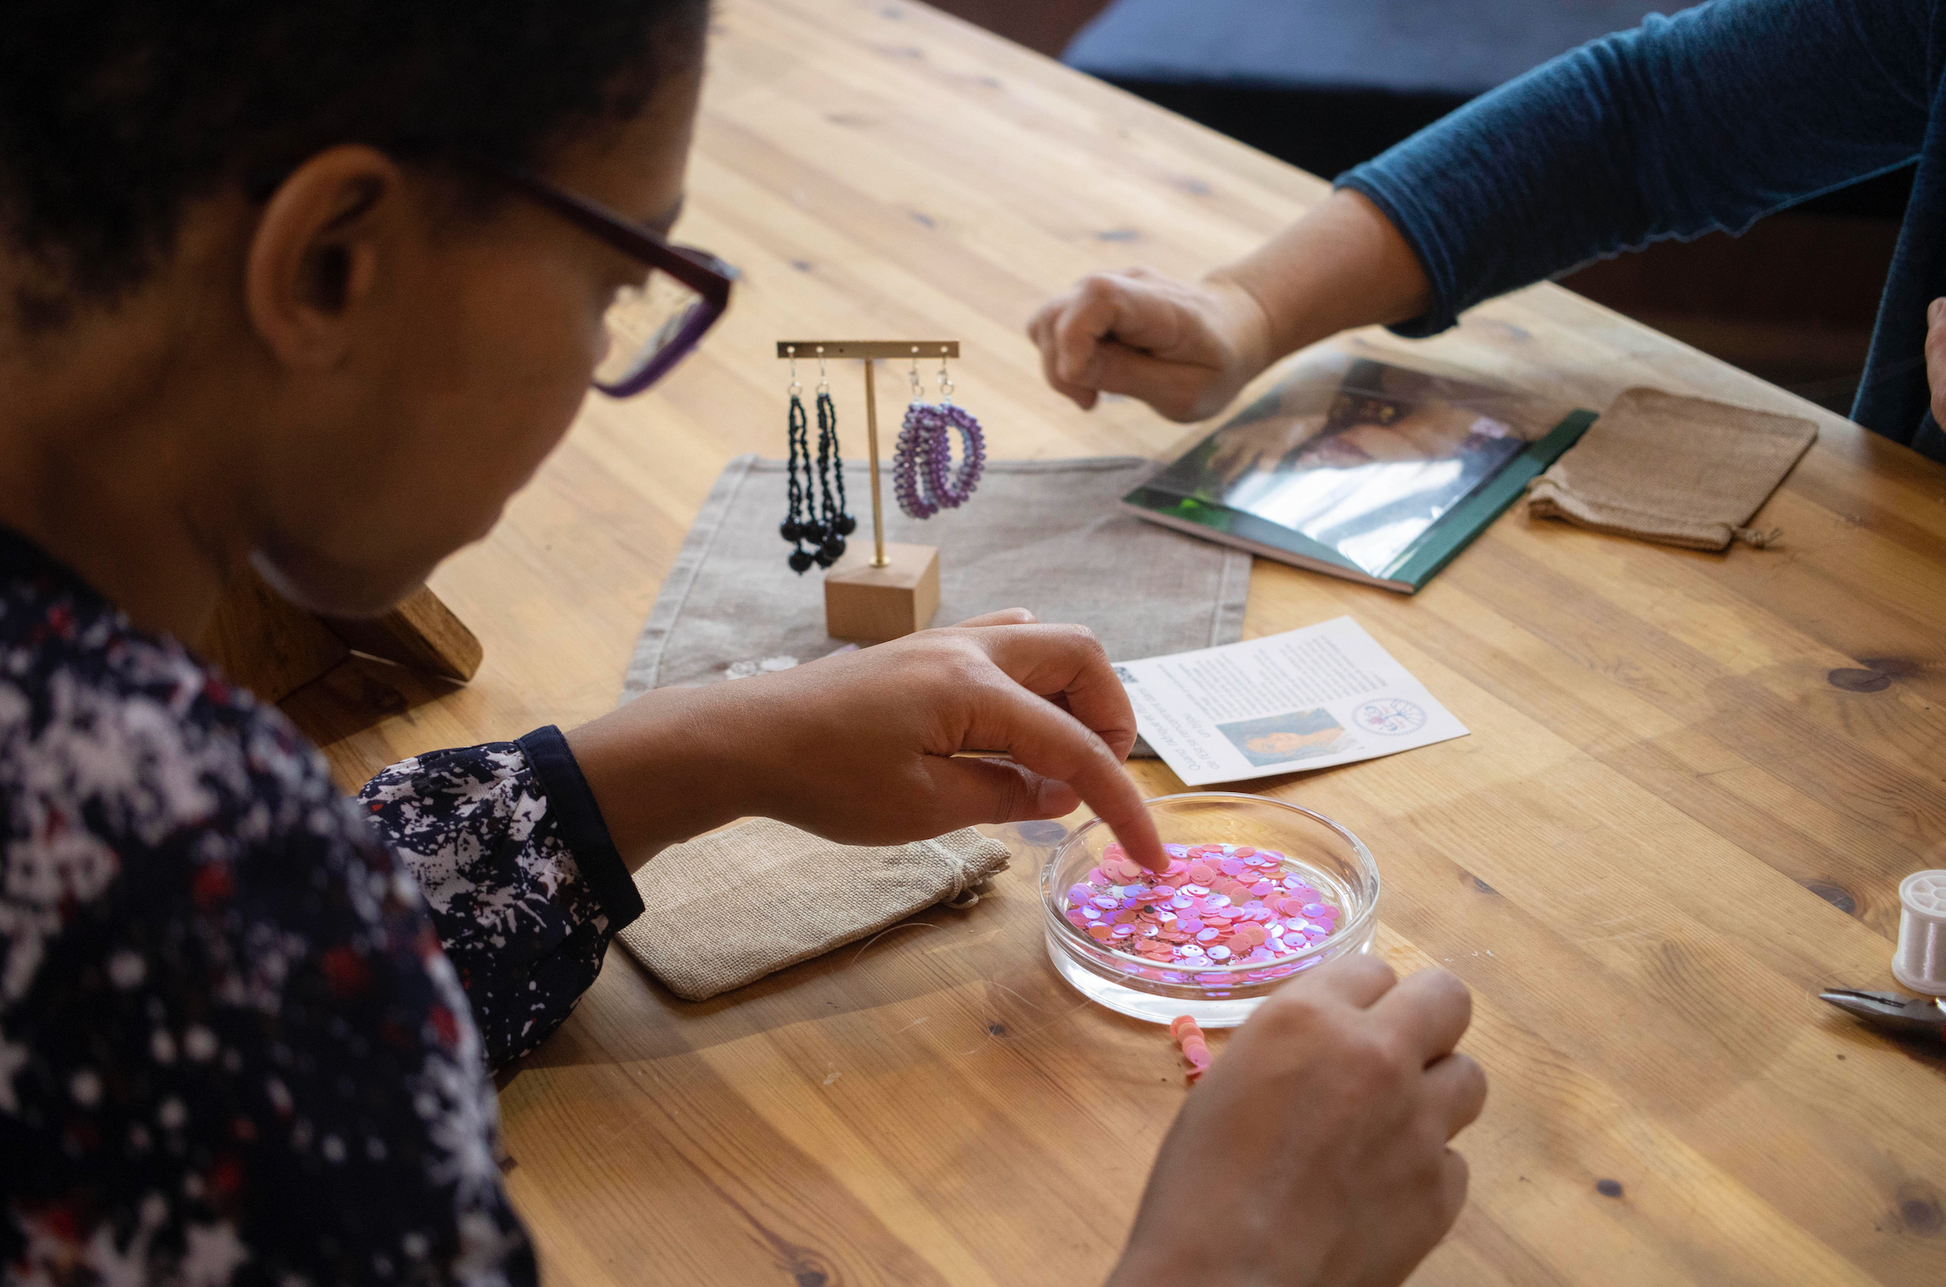 Jewelry Making Workshop with Édit in Bruxelles, Belgium by subcultours